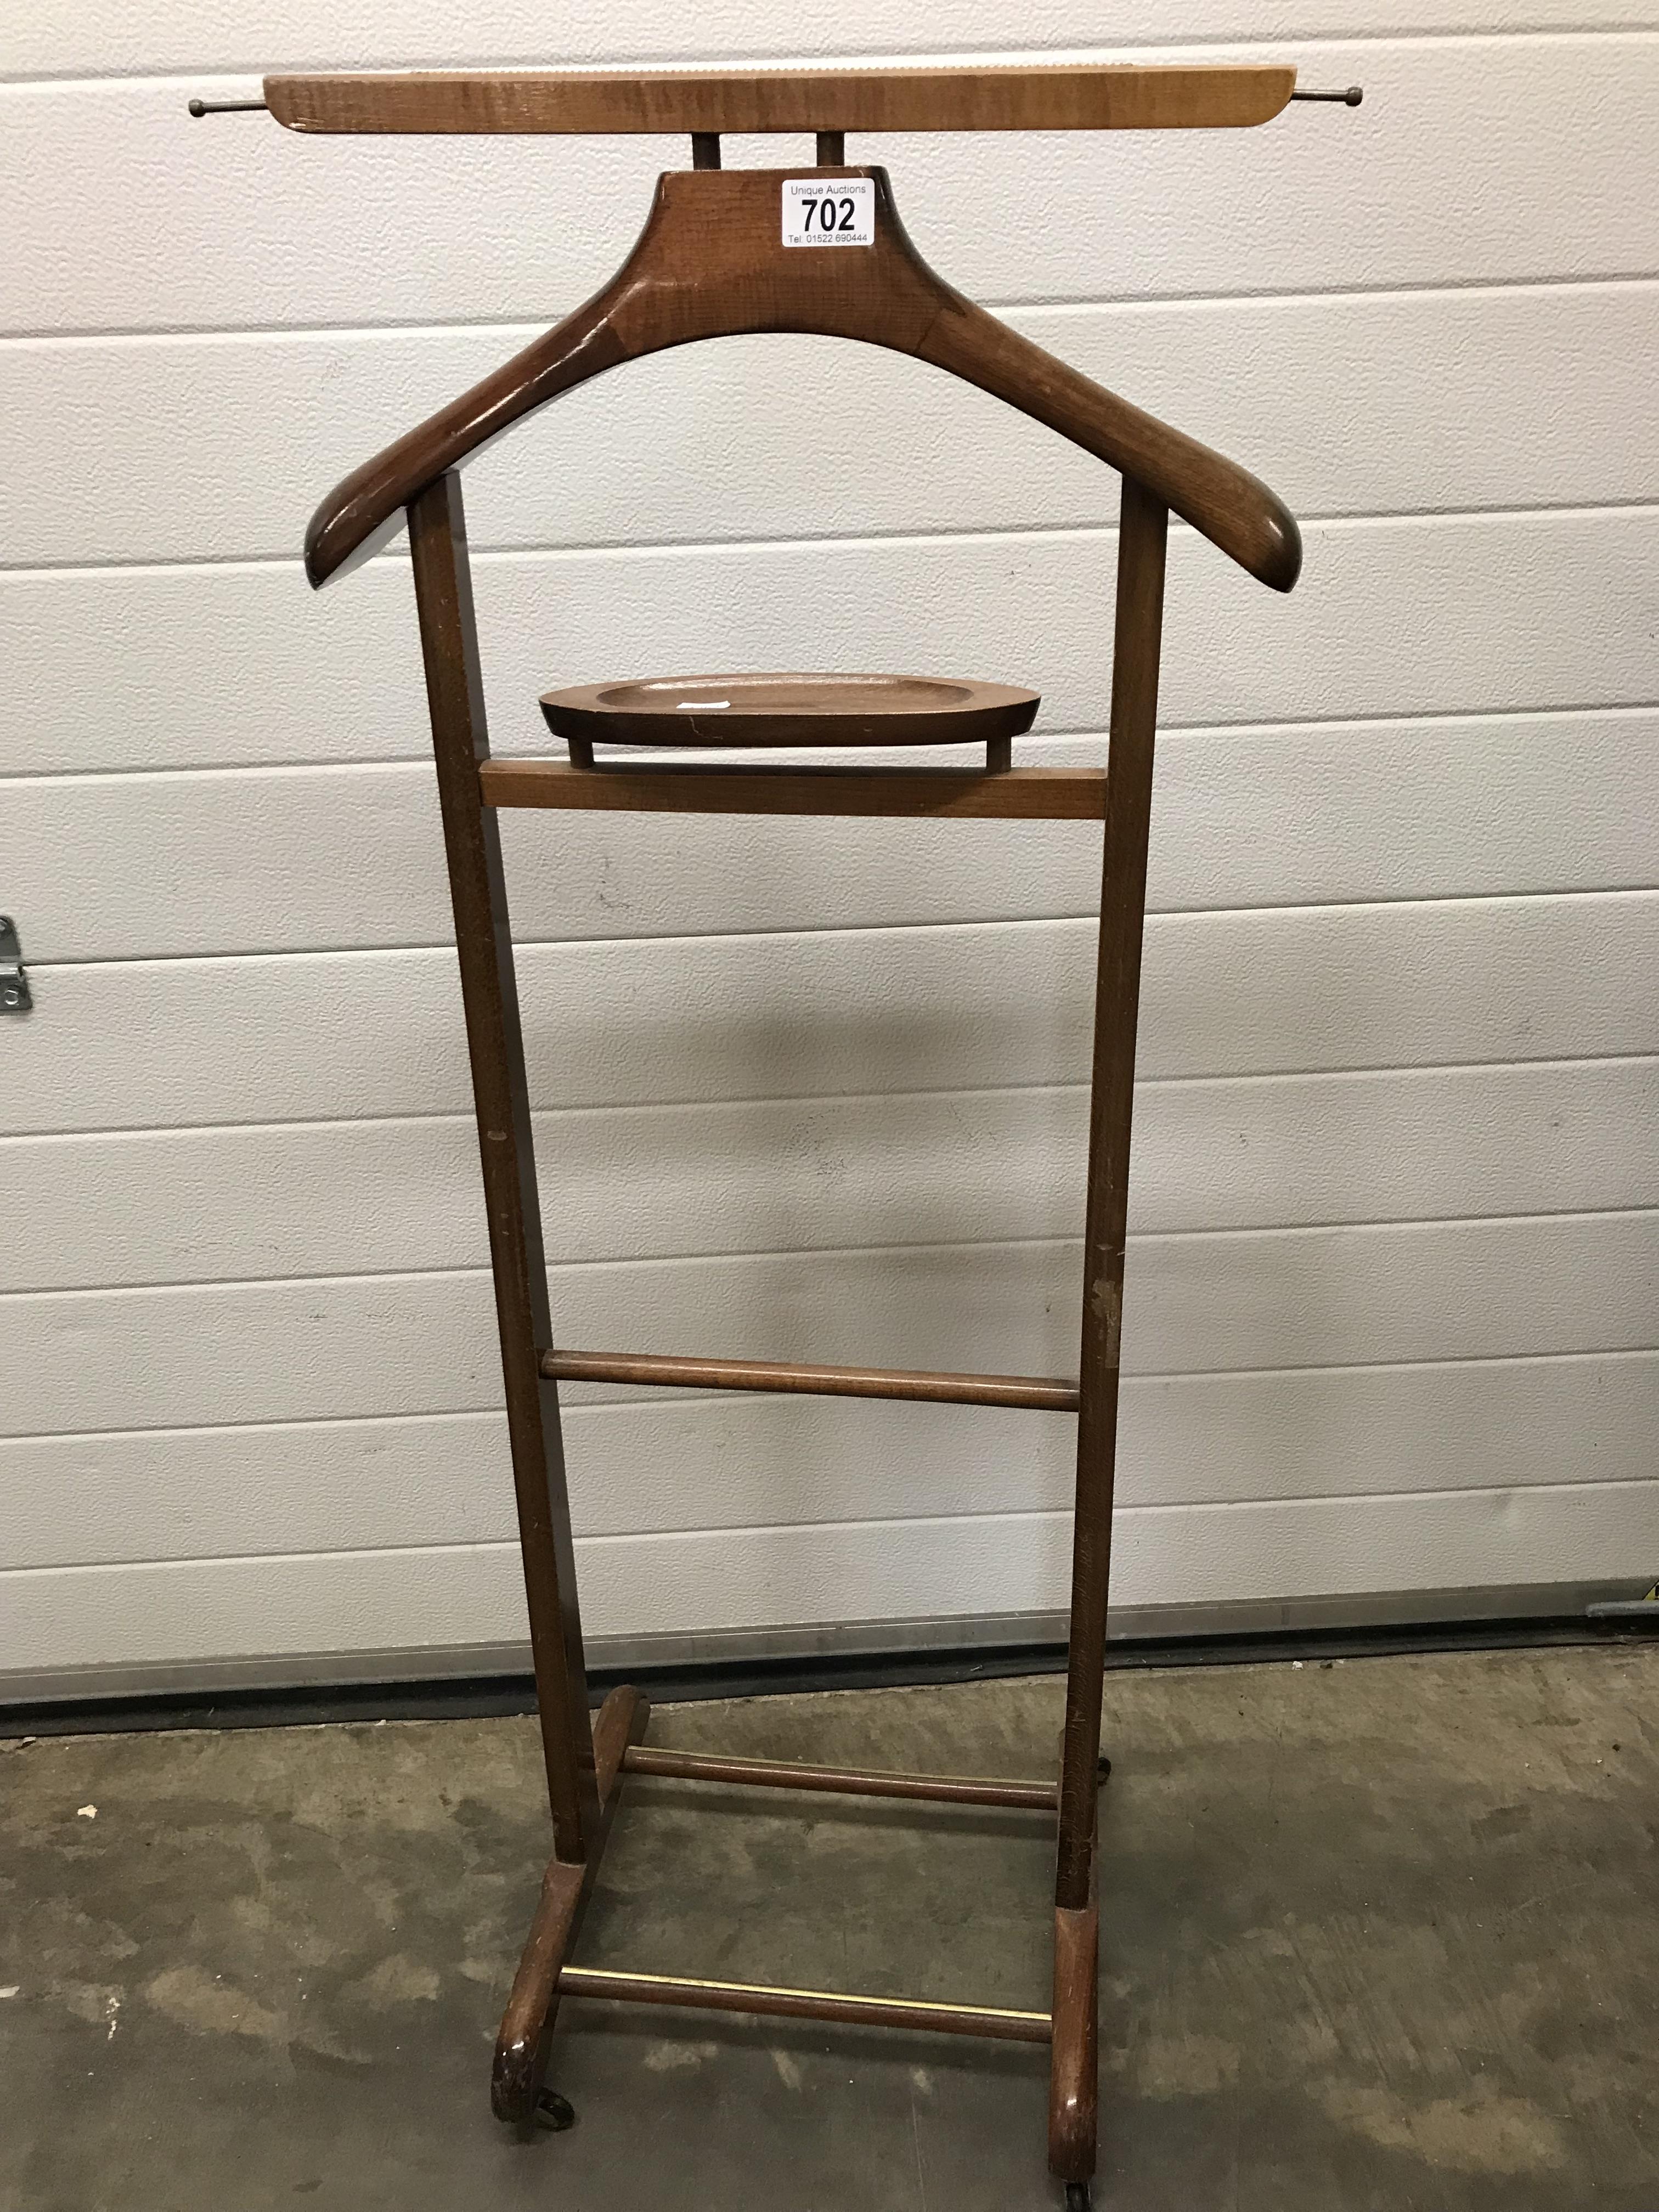 Mens Valet Stand - Image 2 of 5